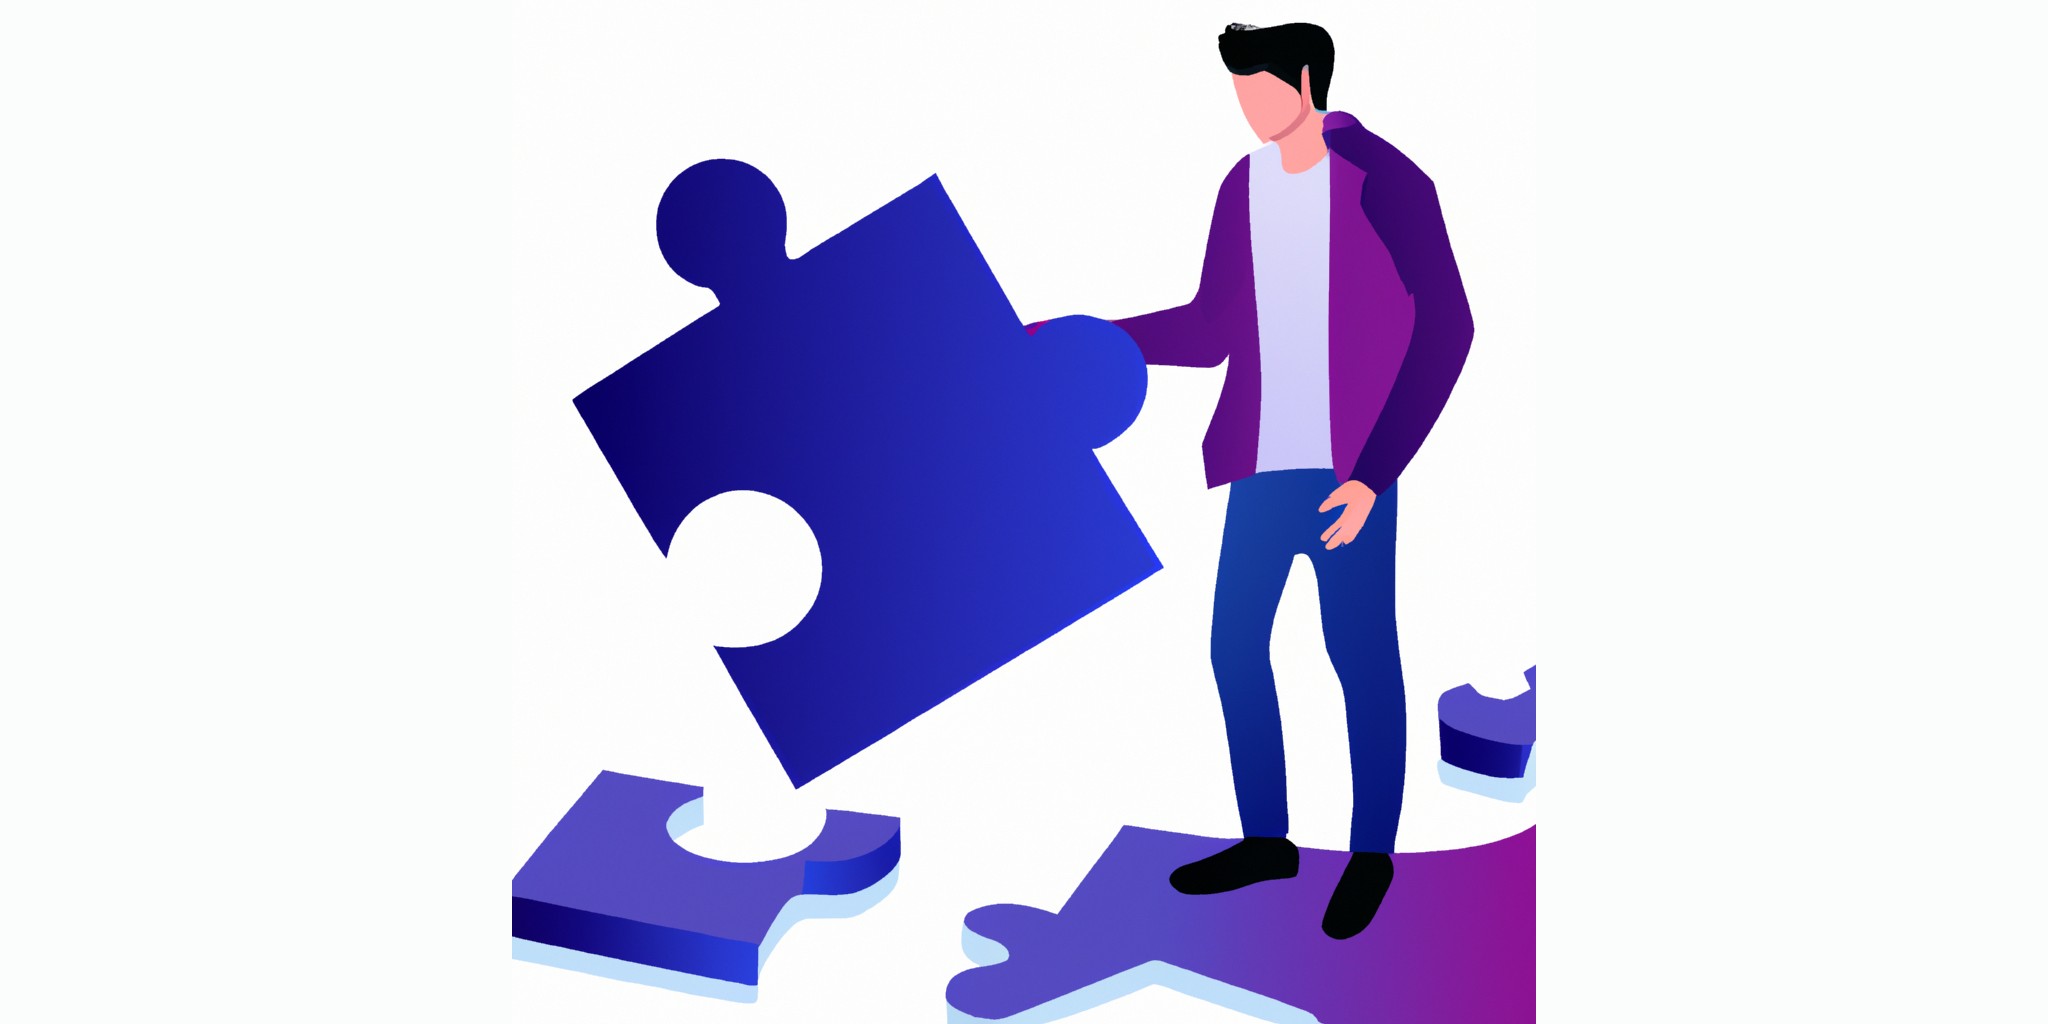 a jigsaw with a person in front in flat illustration style with gradients and white background